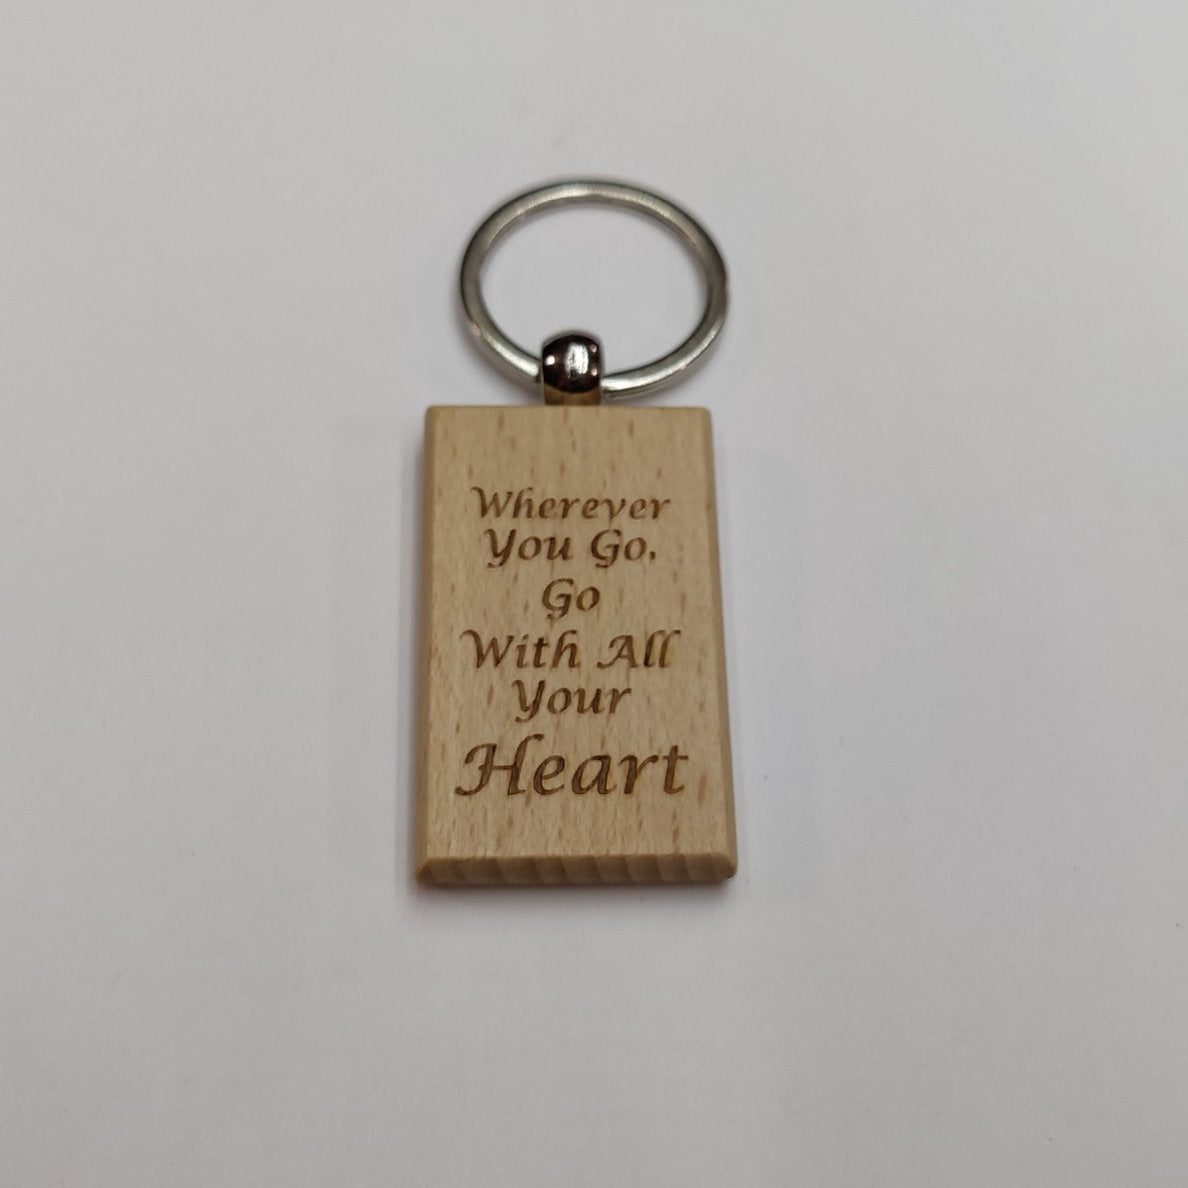 "Wherever You Go, Go With All Your Heart" Wood Keychain - JP Graphics